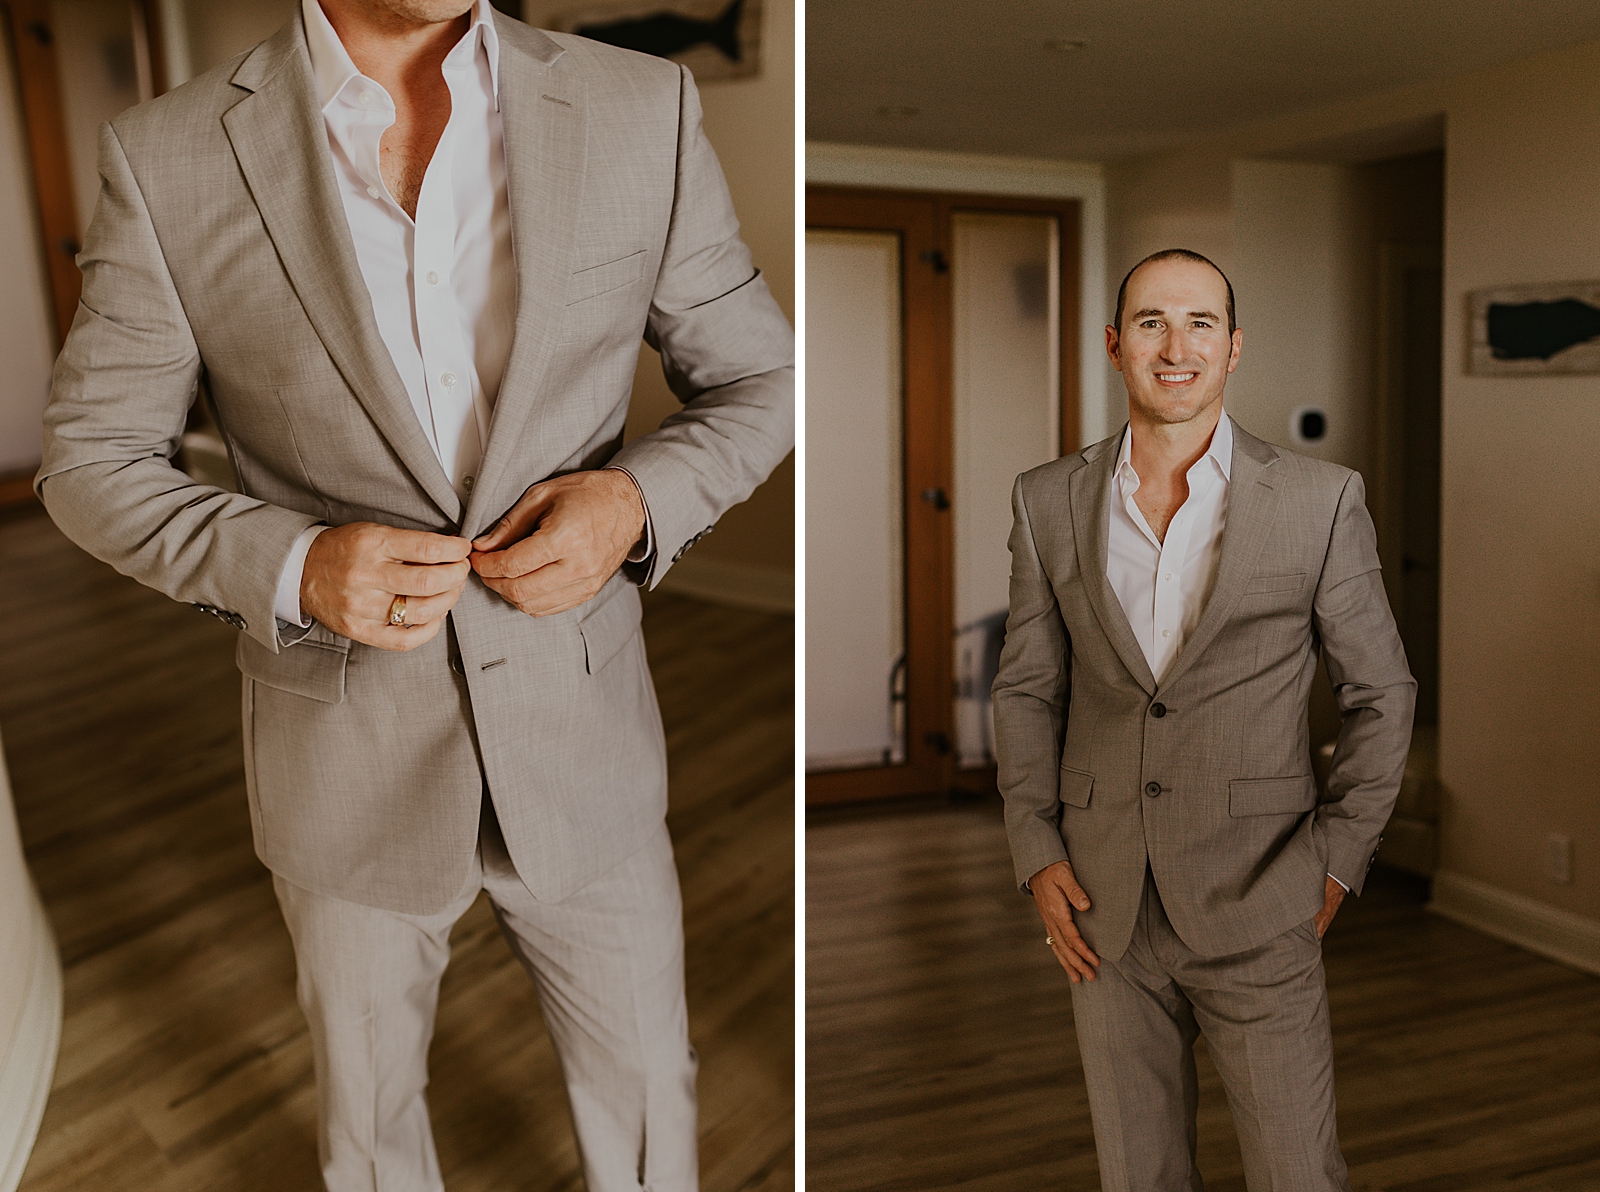 Groom buttoning up jacket and Getting Ready in hotel room